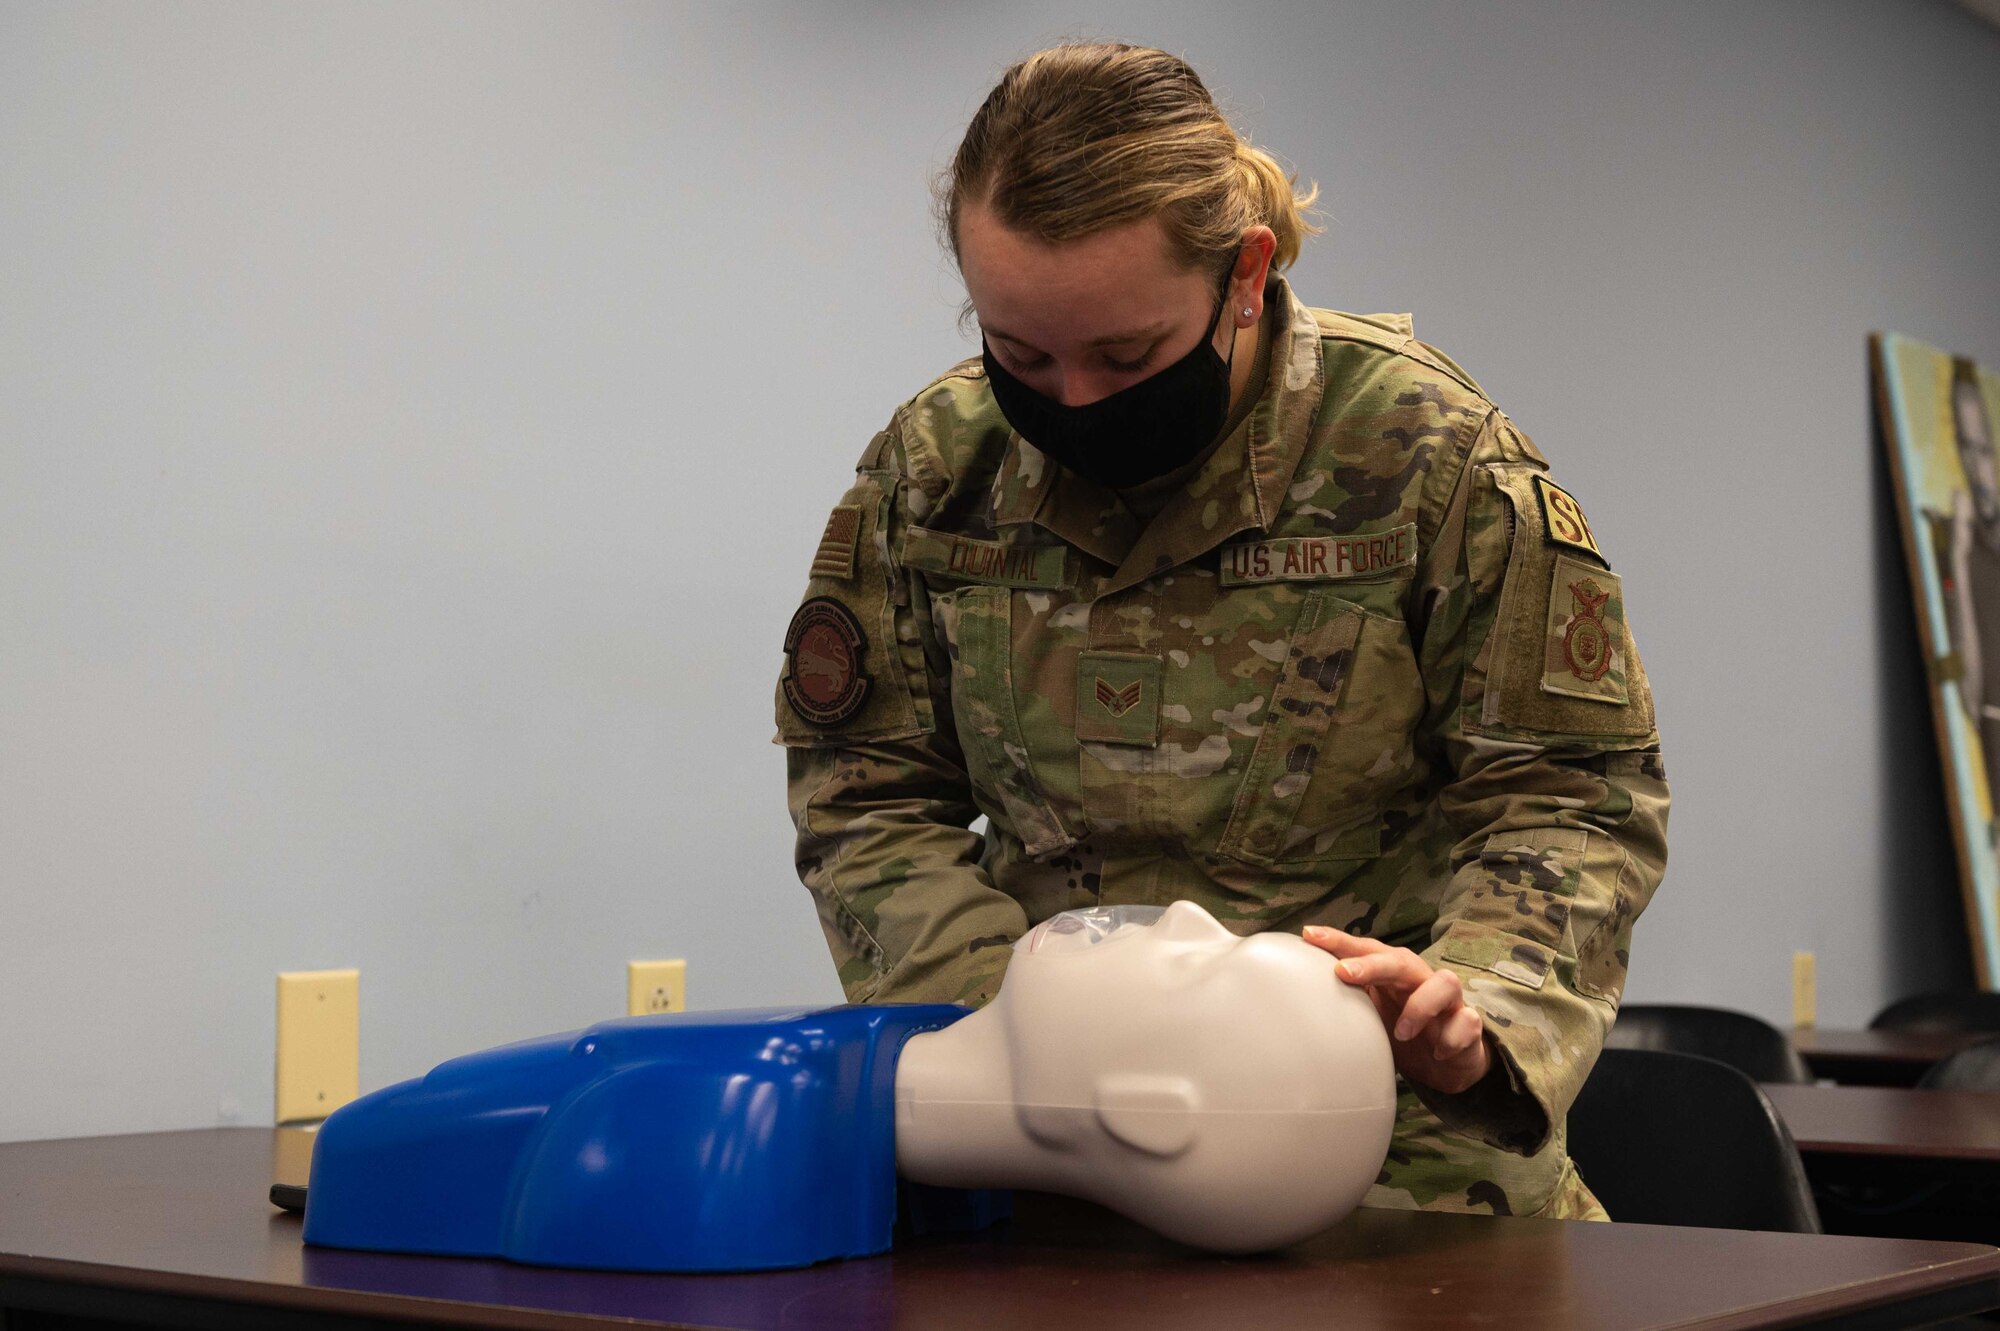 Senior Airman Juliette Quintel, 4th Security Forces Squadron defender, practices CPR on a mannequin during a CPR certification class at Seymour Johnson Air Force Base, North Carolina, Nov. 9, 2021. Part of the training is to perform a rapid assessment for responsiveness and help unresponsive adults, children and infants. (U.S. Air Force photo by Airmen 1st Class Sabrina Fuller)